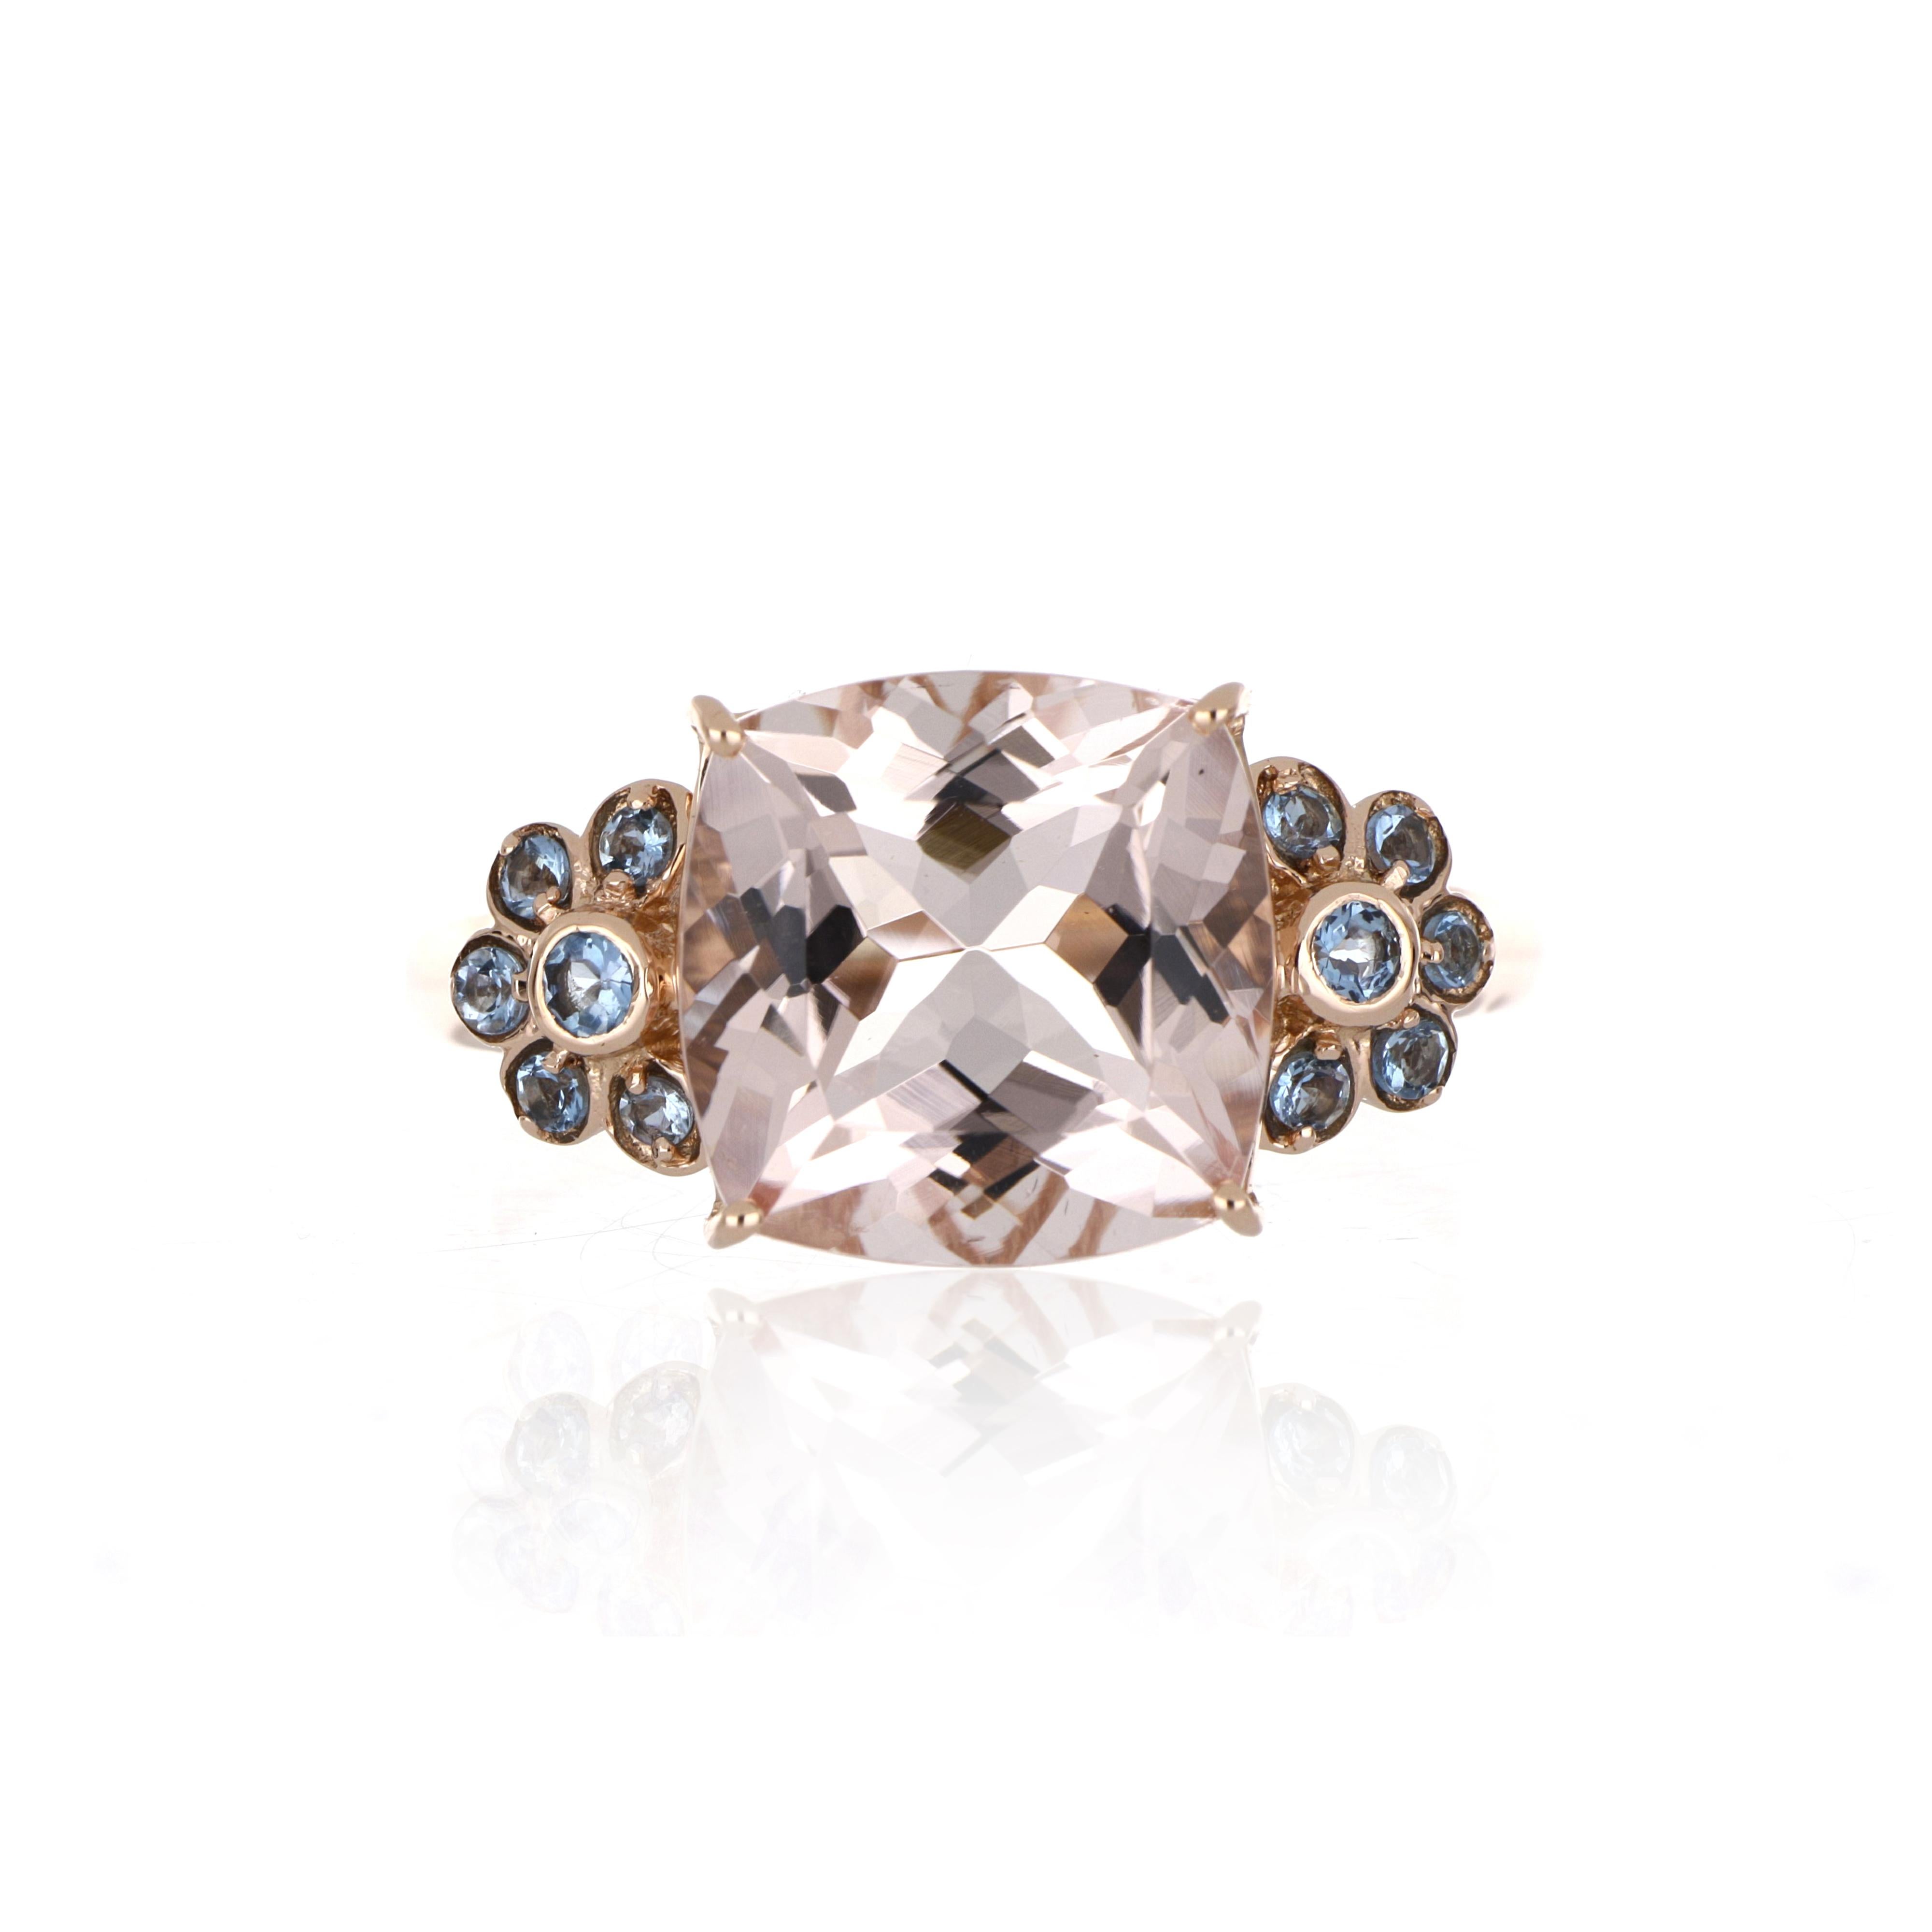 Elegant and exquisitely detailed Cocktail 14K Ring, centre set with 5.09 Ct Cushion Morganite surrounded by Bezel Set Santa Marai Aquamarine rounds total weight 0.20 cts. Beautifully Hand crafted in 14 Karat Rose Gold.

Stone Size:
Morganite: 11 x